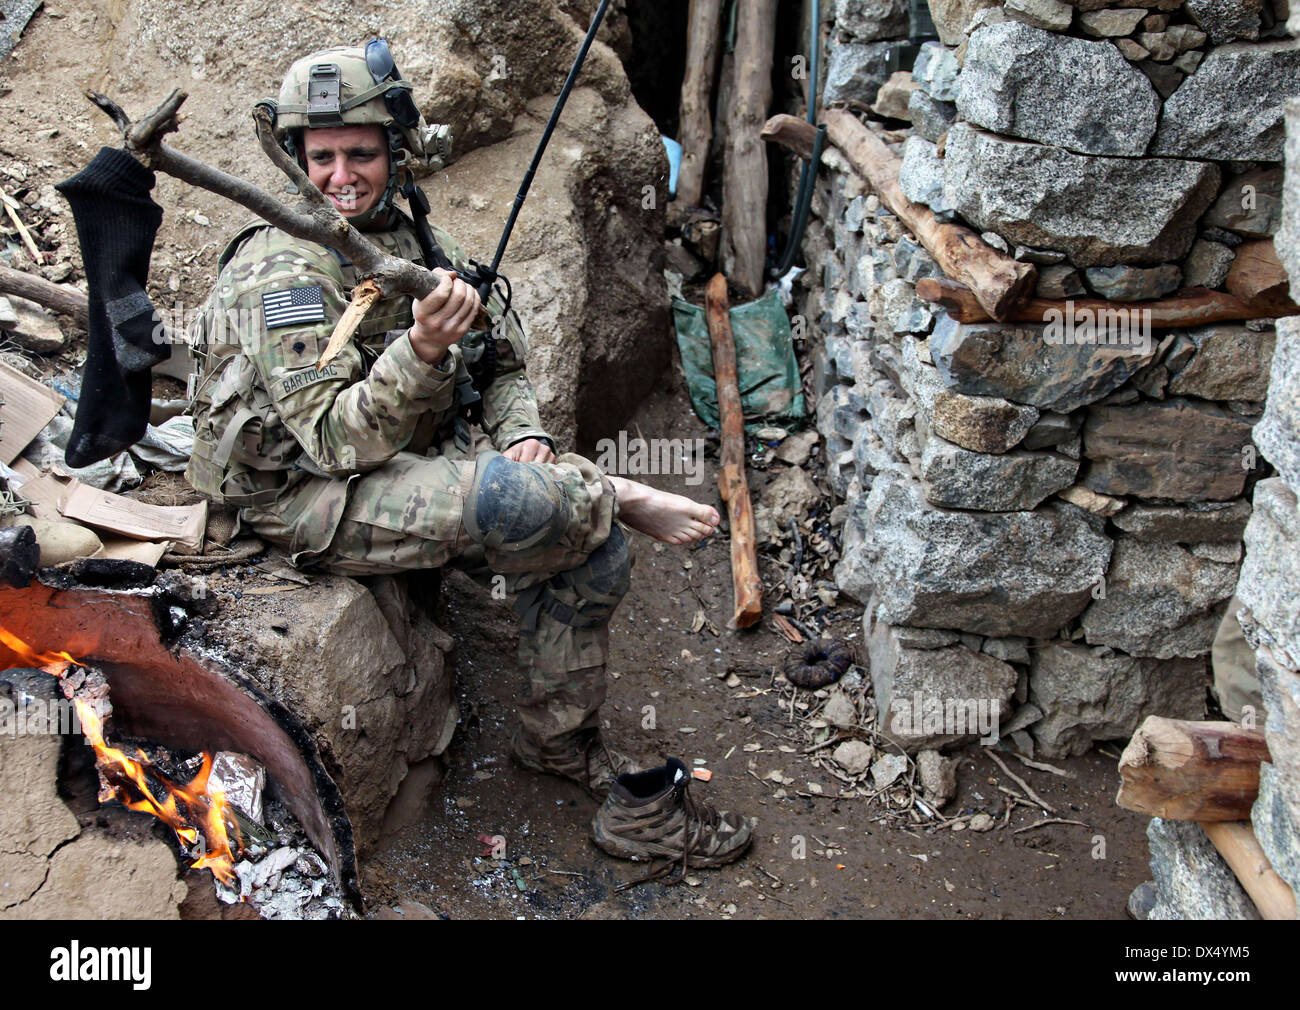 A US Army soldier with the 101st Airborne Division dries his socks after five days of battle against Taliban insurgents March 29, 2011 in the valley of Barawala Kalet, Kunar province Afghanistan. Stock Photo